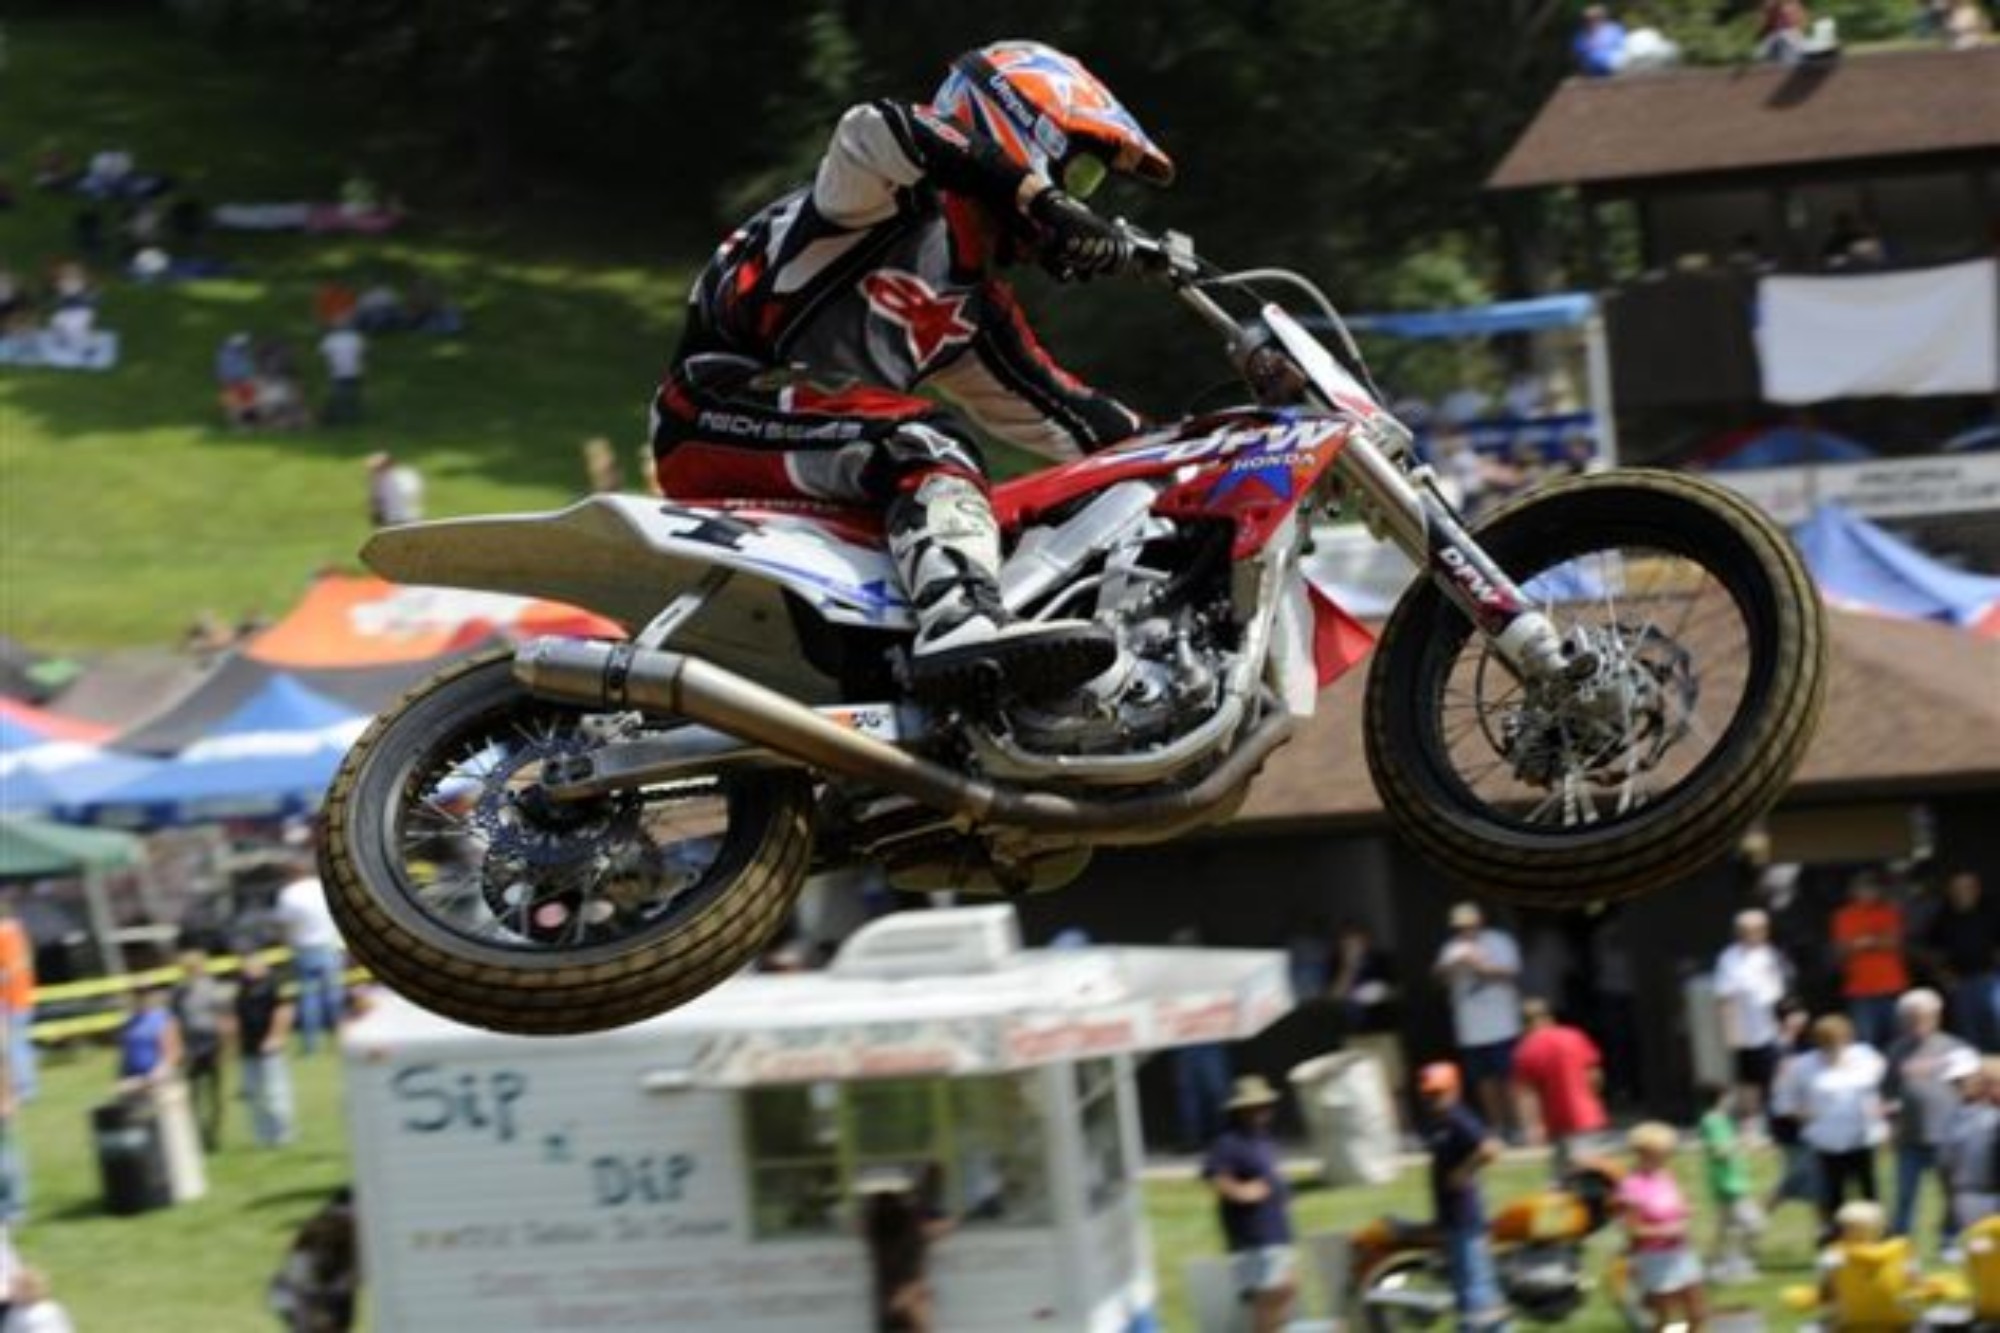 INTRODUCING OUR NEW MOTOCROSS RIDER- LEWIS STEWART